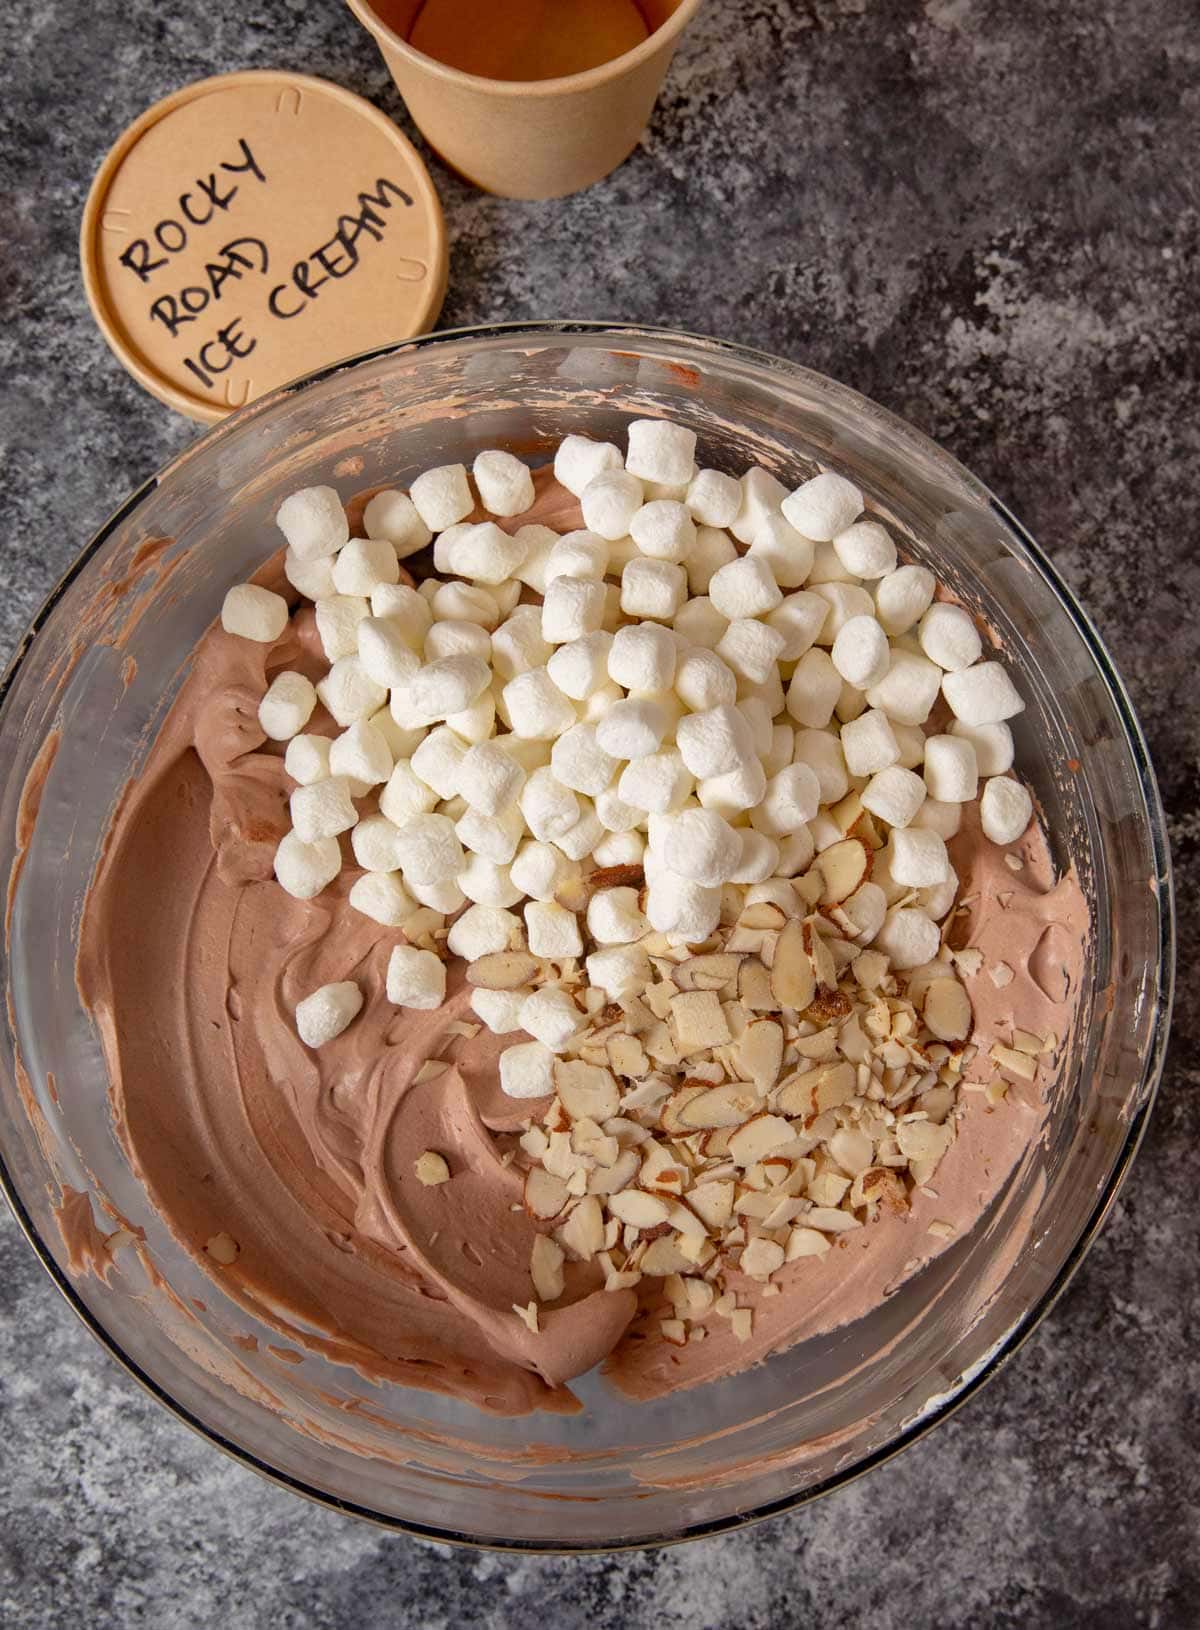 Rocky Road Ice Cream chocolate base with marshmallows and nuts